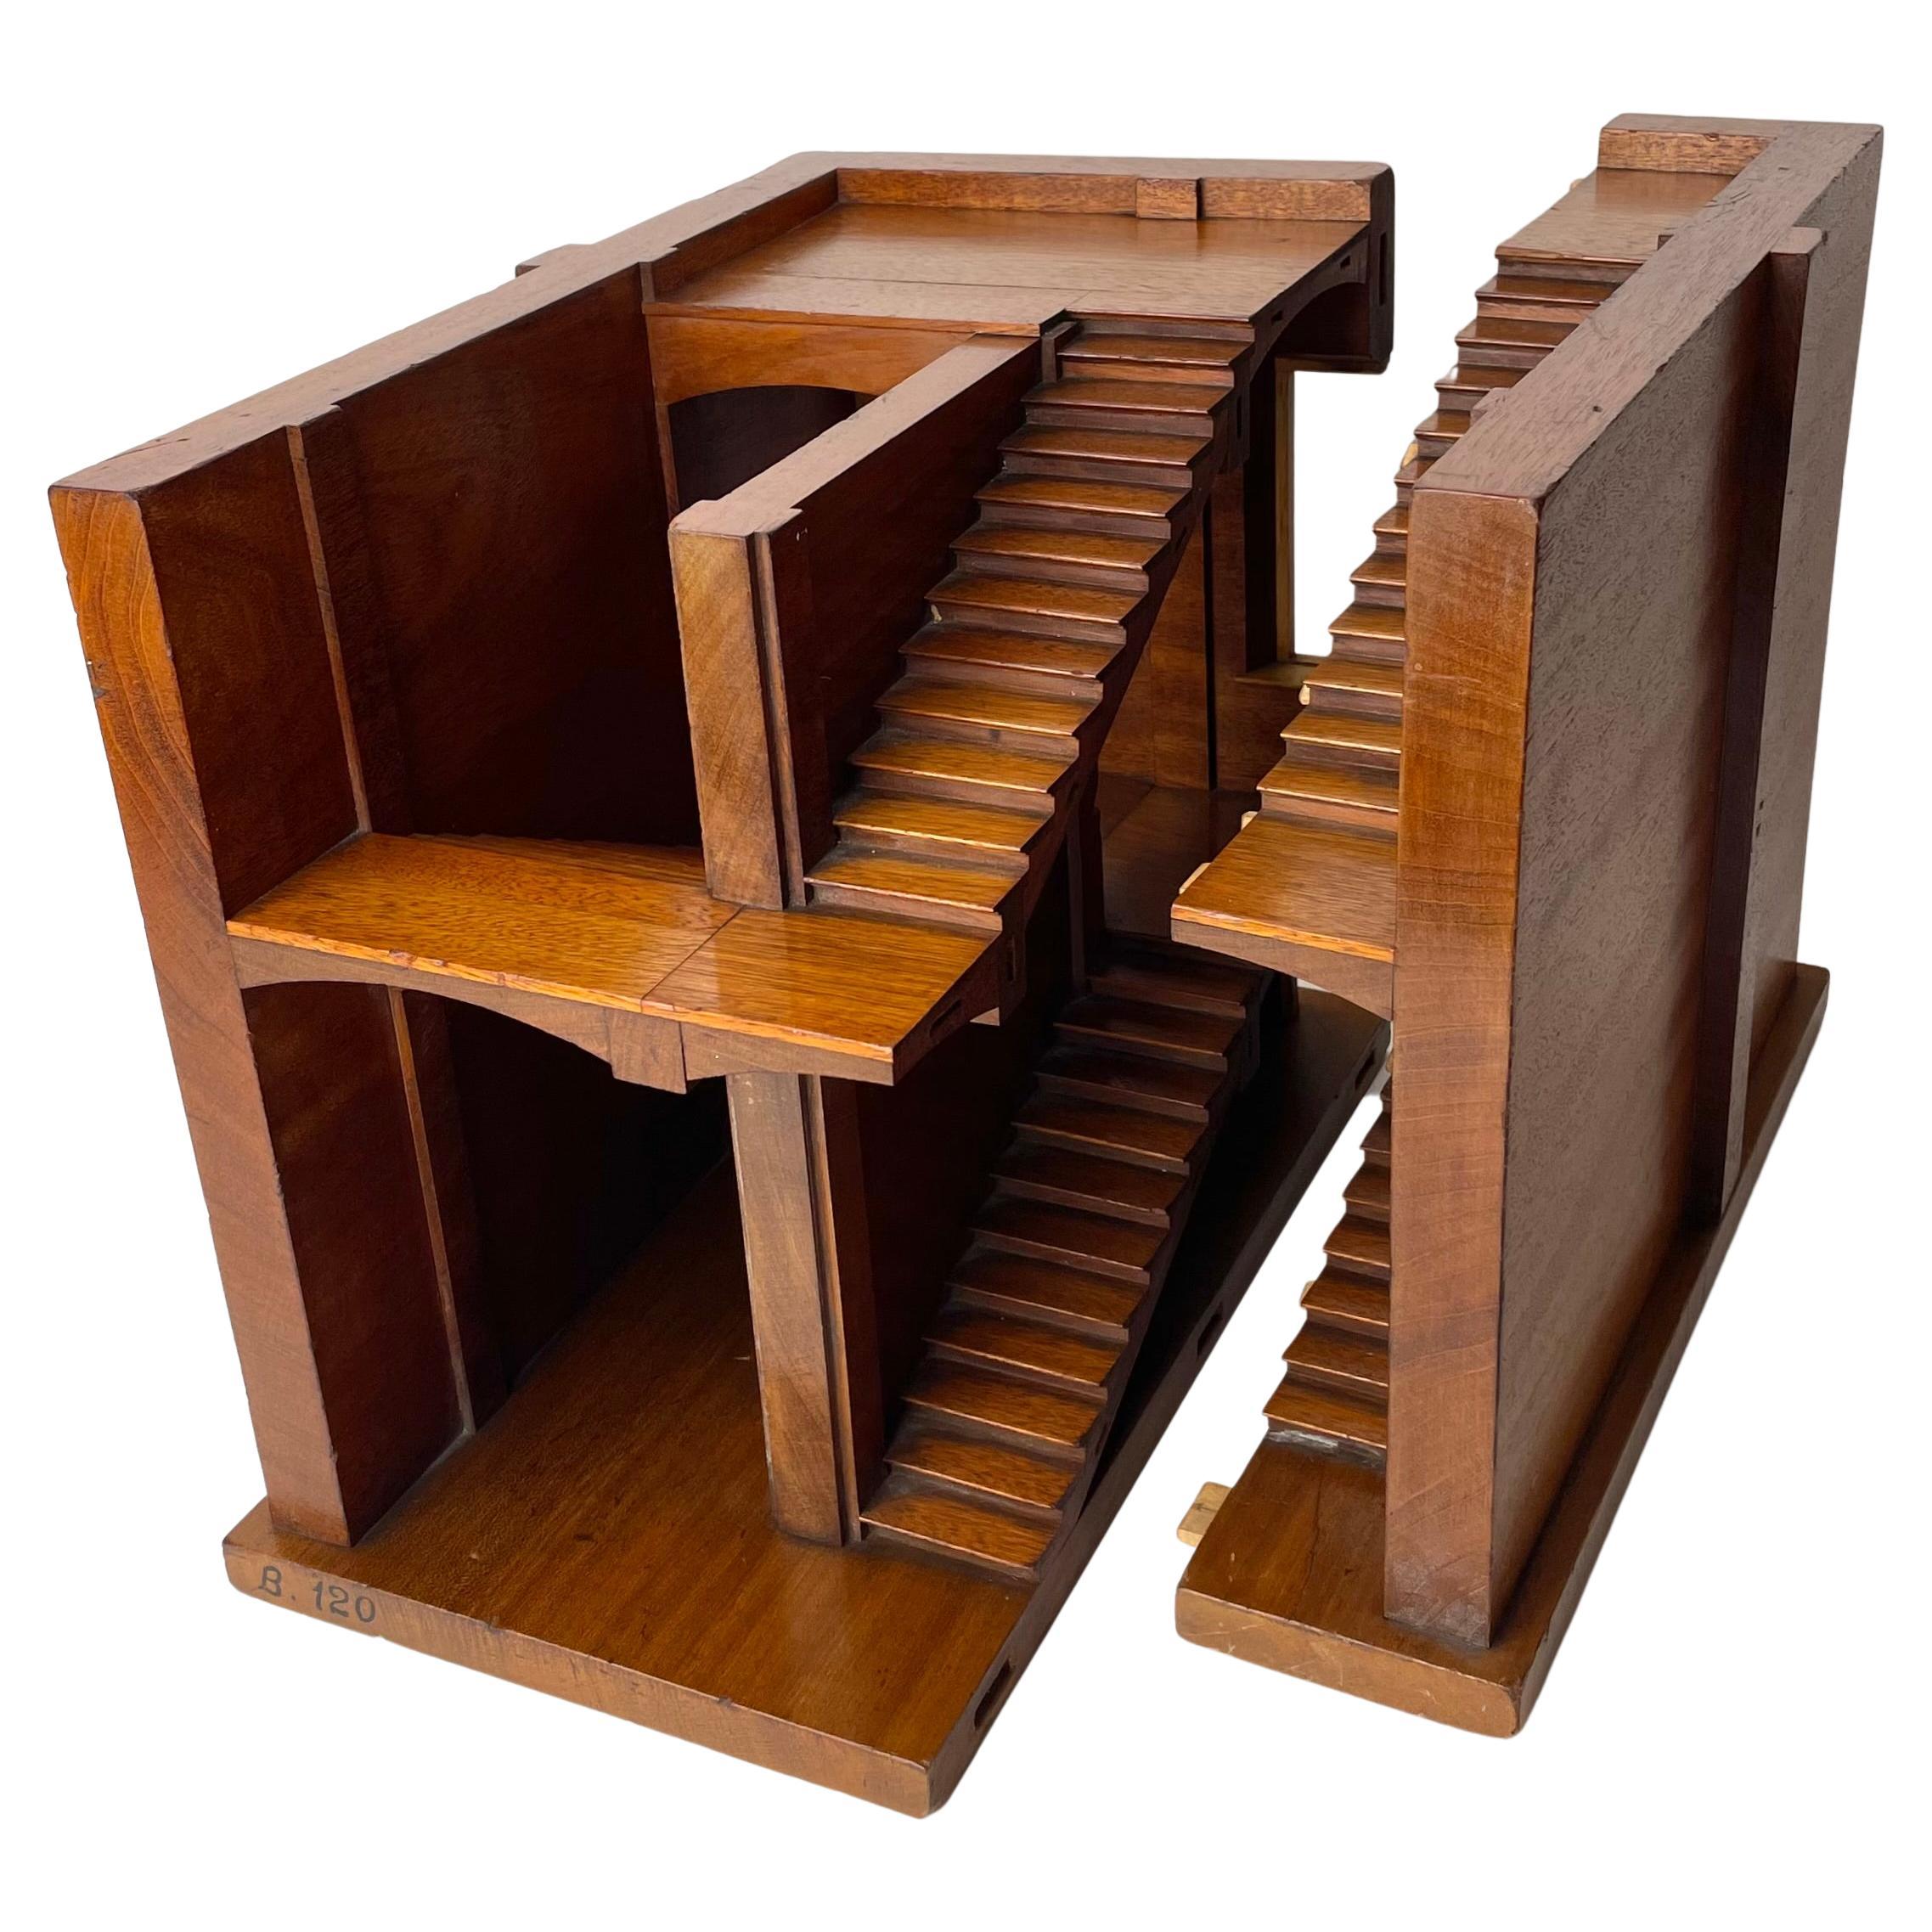 Mahogany Staircase Section Architectural Model, Late 19th/Early 20th C England. For Sale